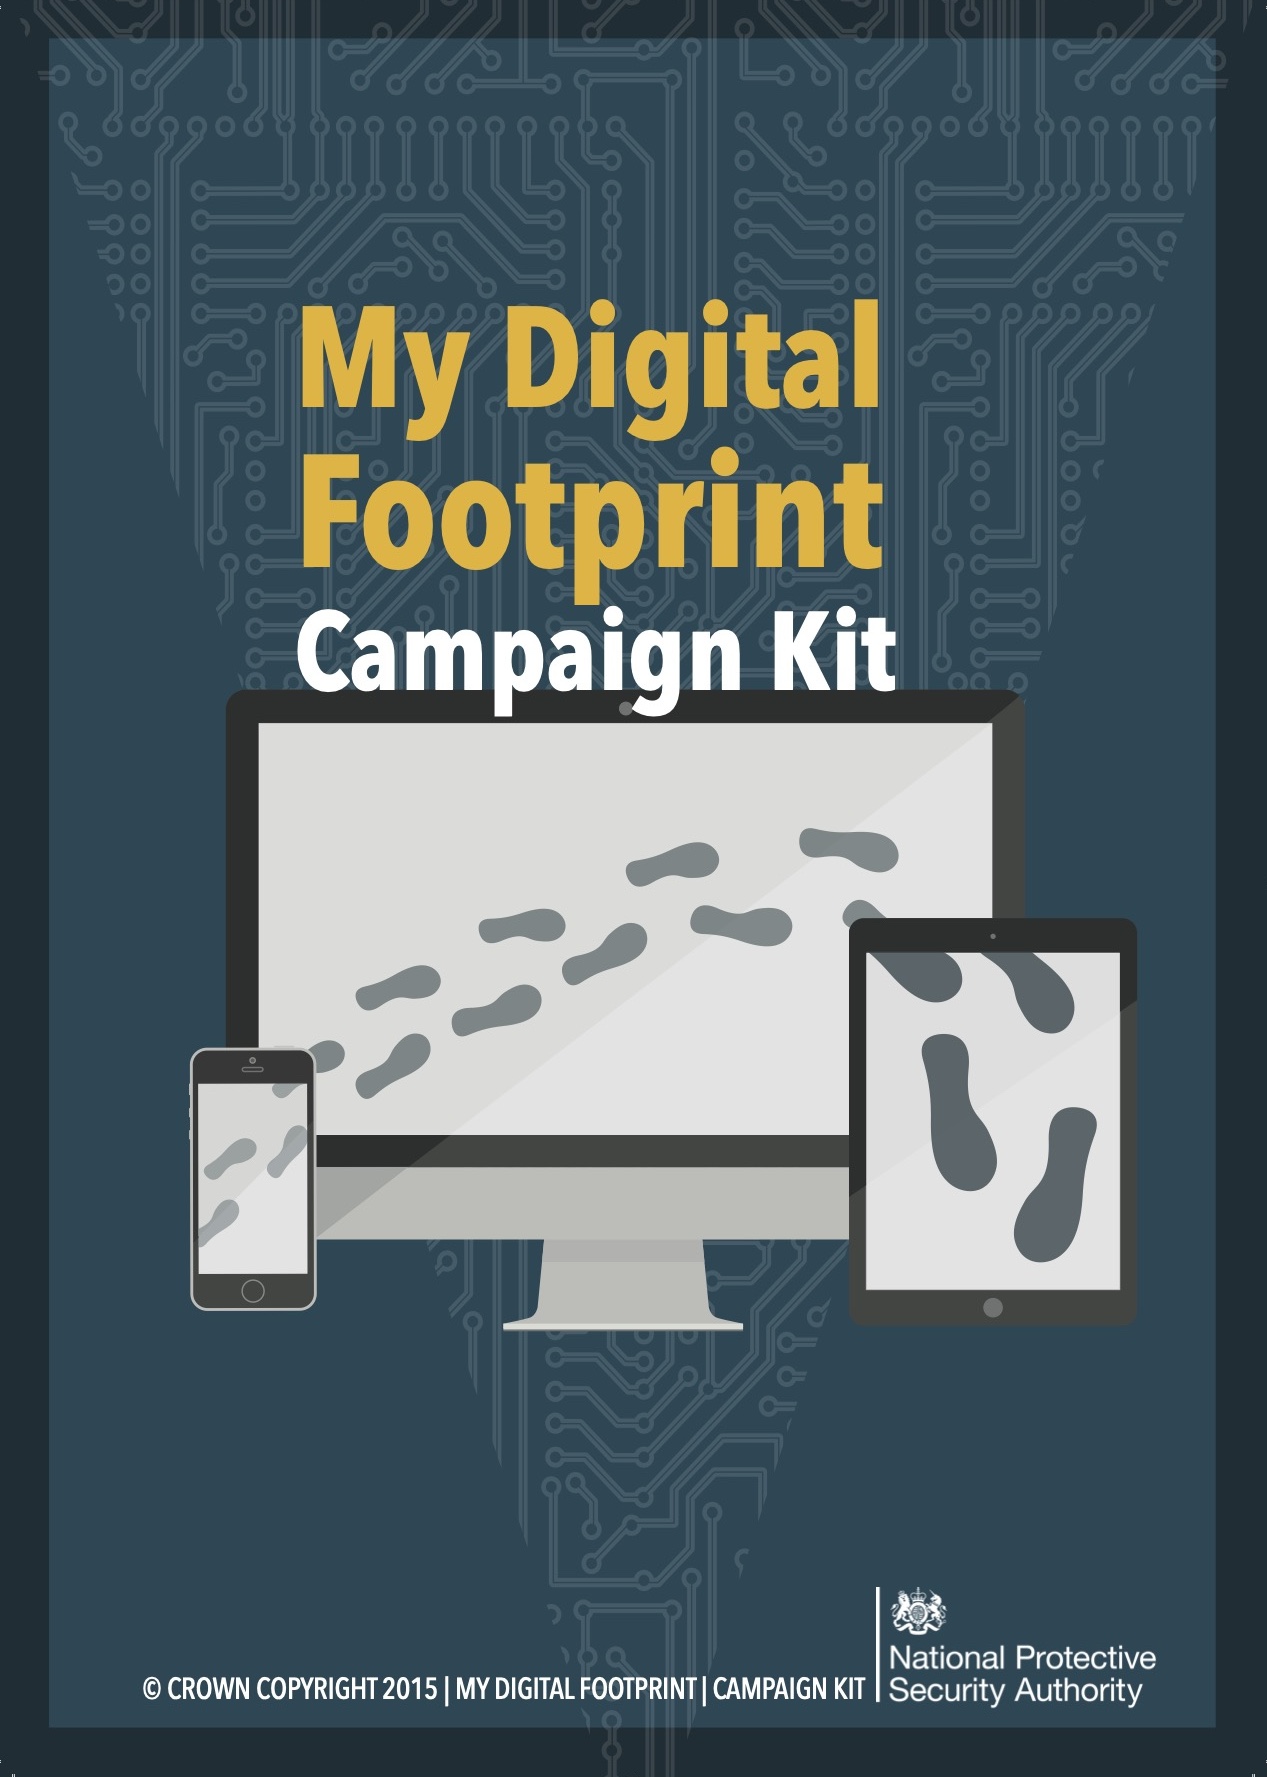 How to run the digital footprint campaign